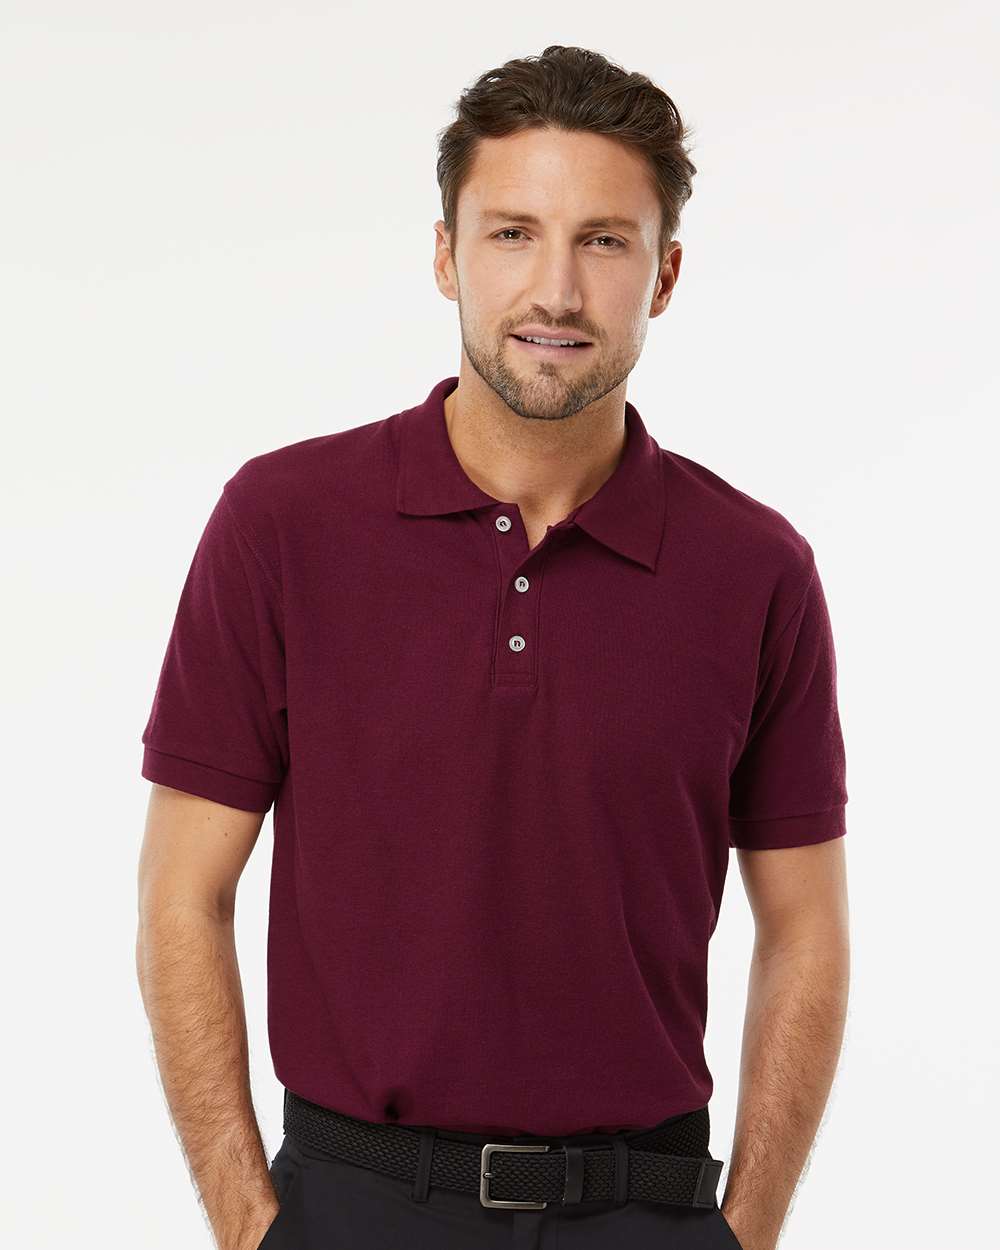 M&O Soft Touch Polo #7006 Maroon